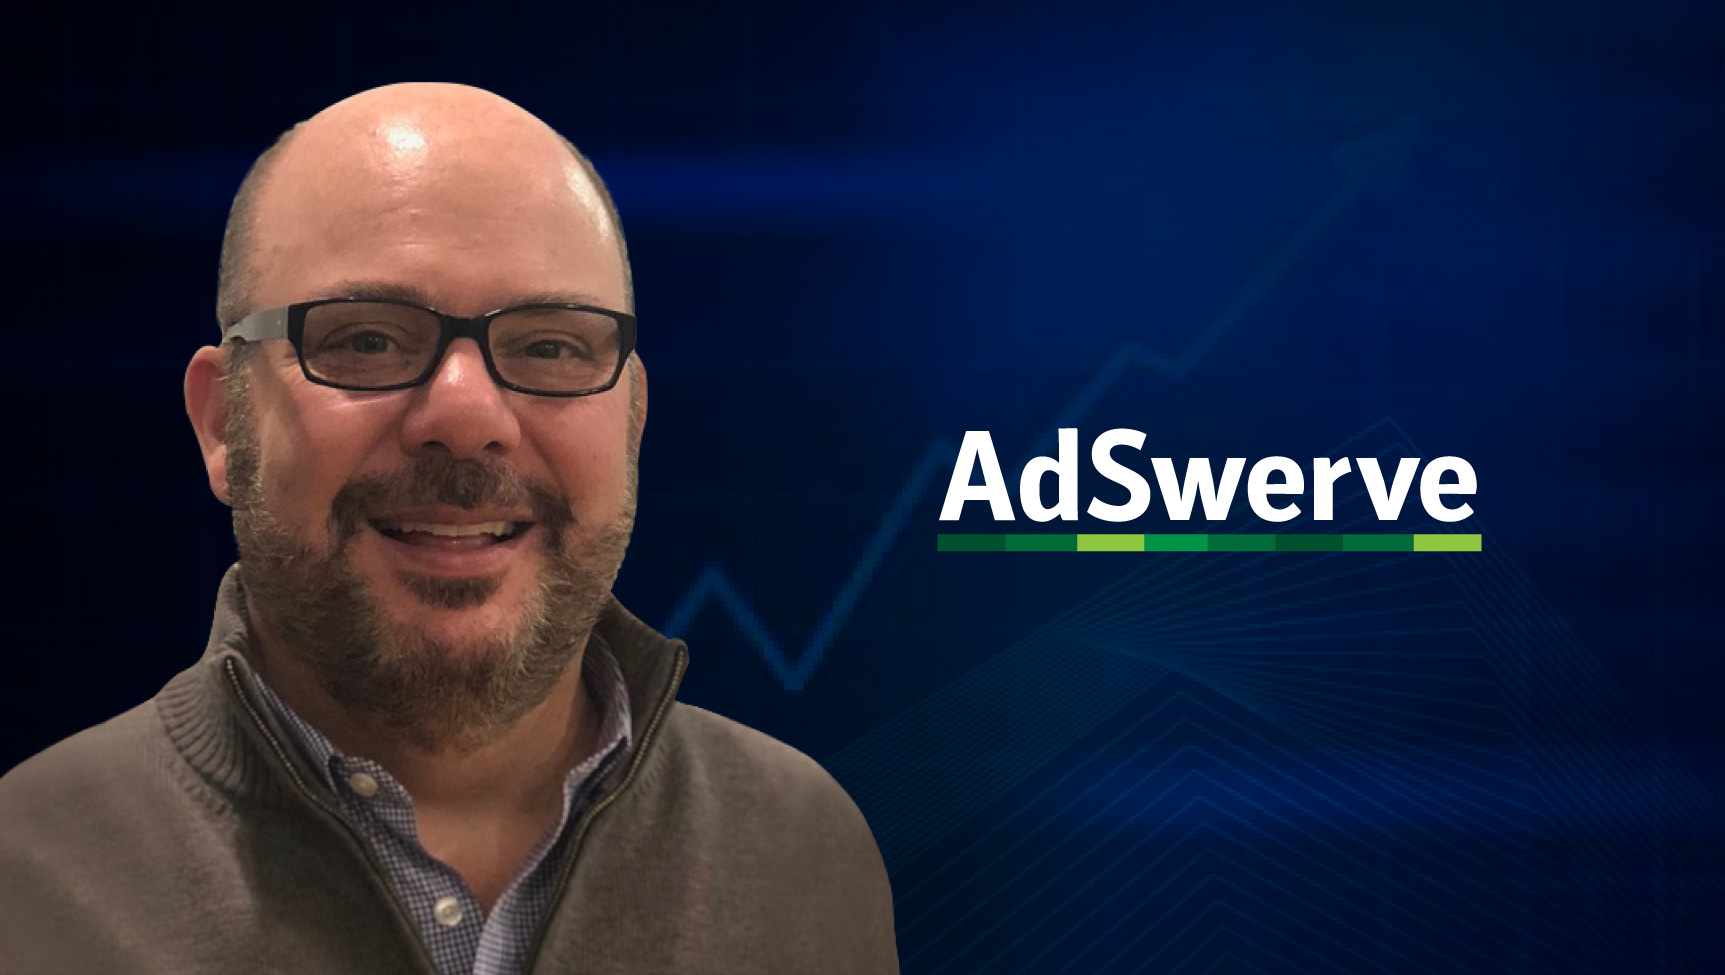 SalesTech Interview with JB Sugar, Vice President at Sales AdSwerve